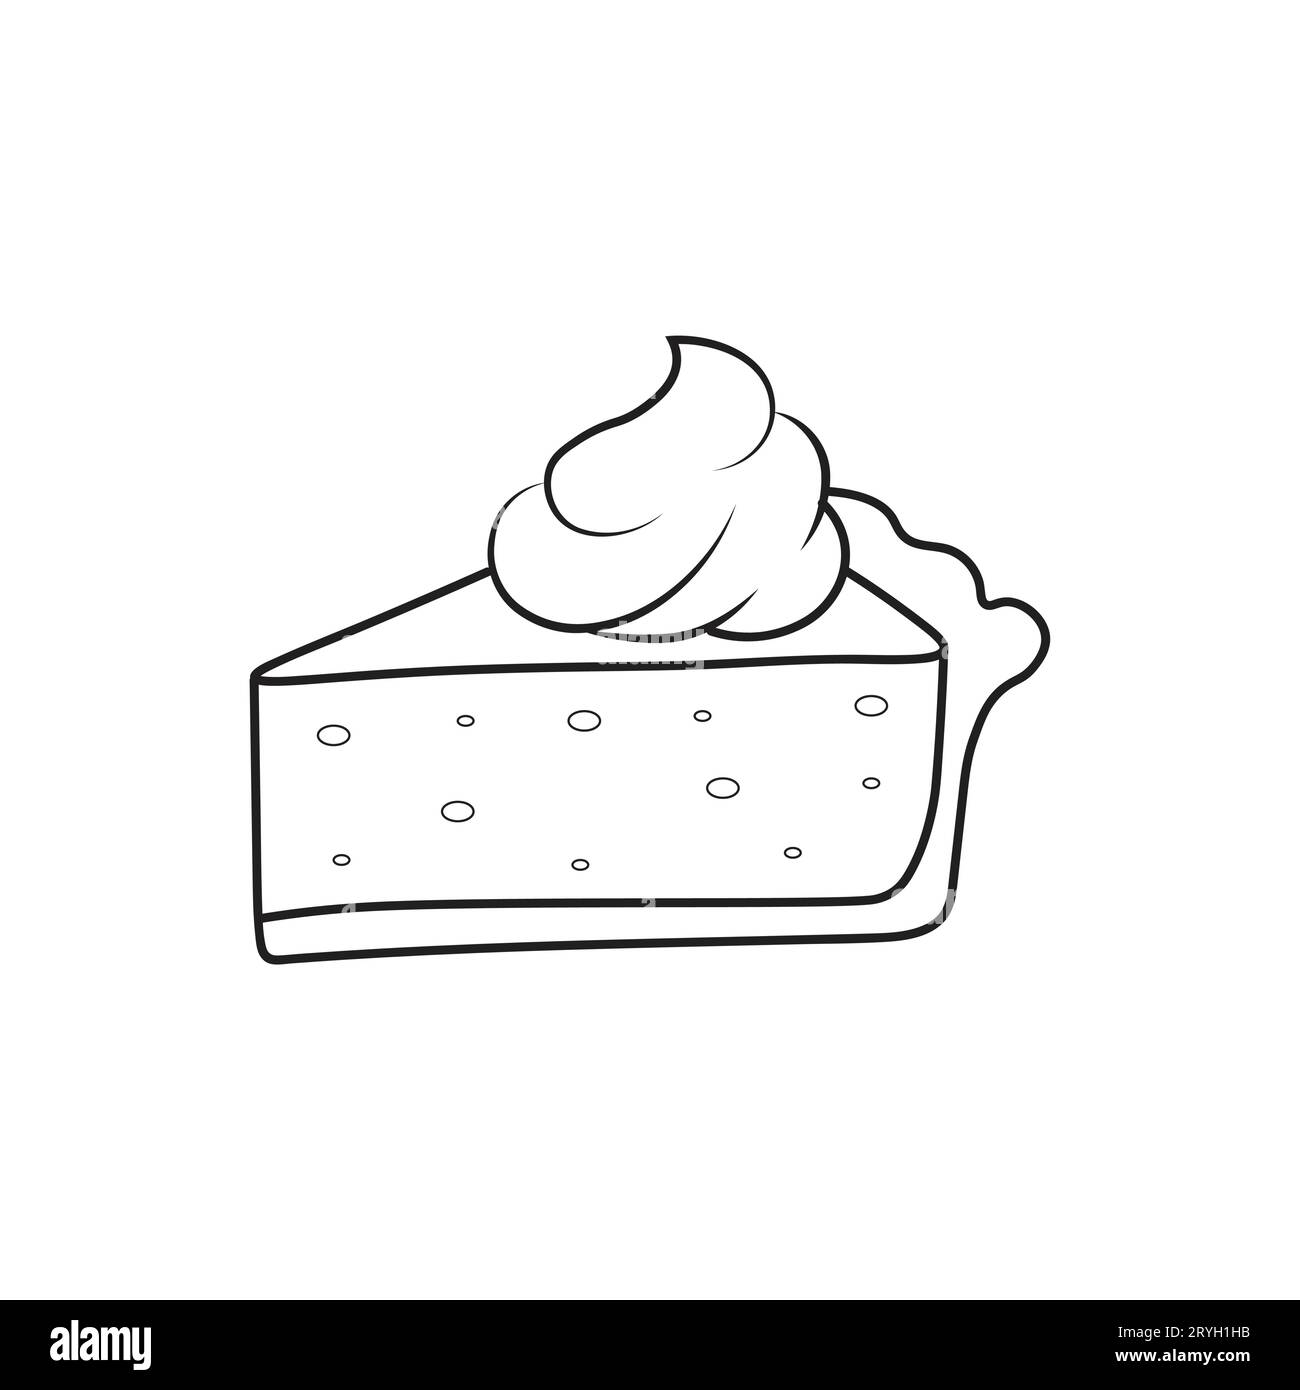 Pumpkin pie thanksgiving and celebration, cake slice.Doodle vector illustration. Isolated on a white background Stock Vector